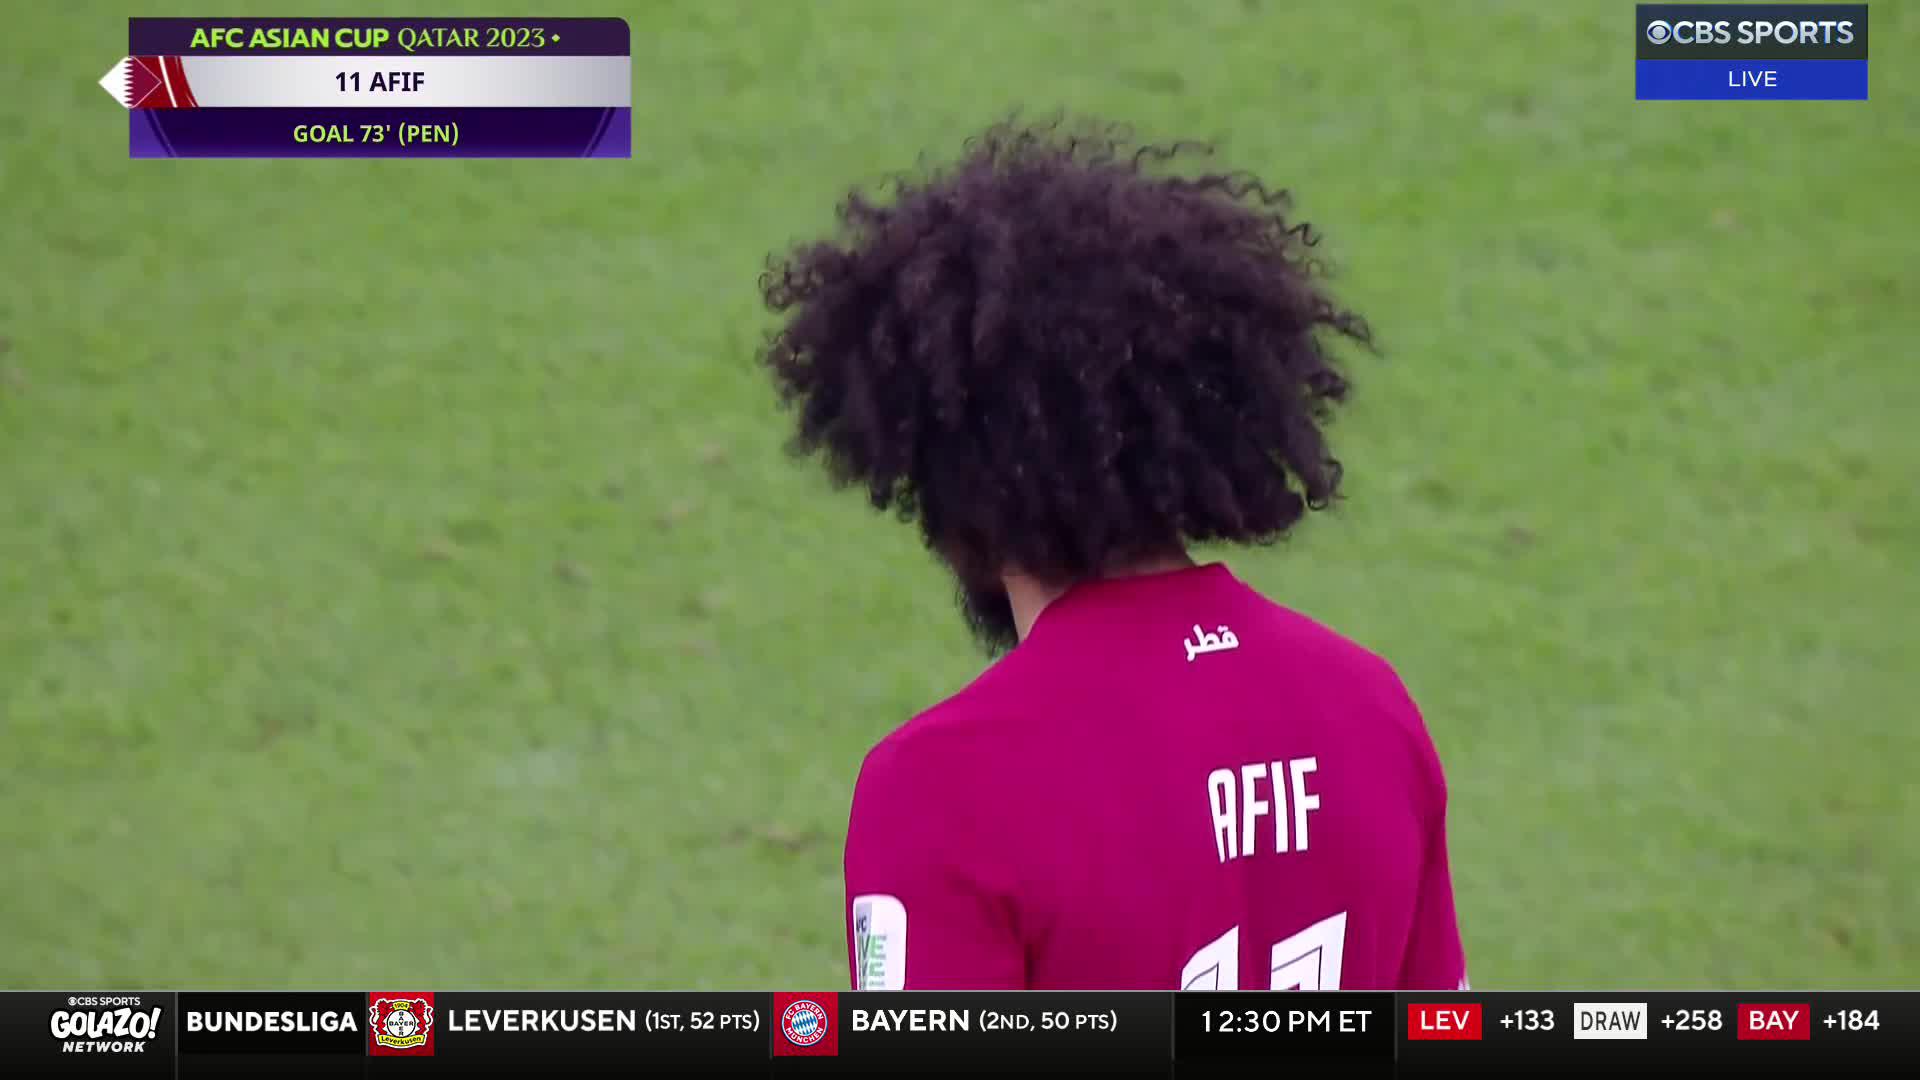 AKRAM AFIF GETS HIS BRACE AND PUTS QATAR RIGHT BACK IN THE LEAD 🌶️